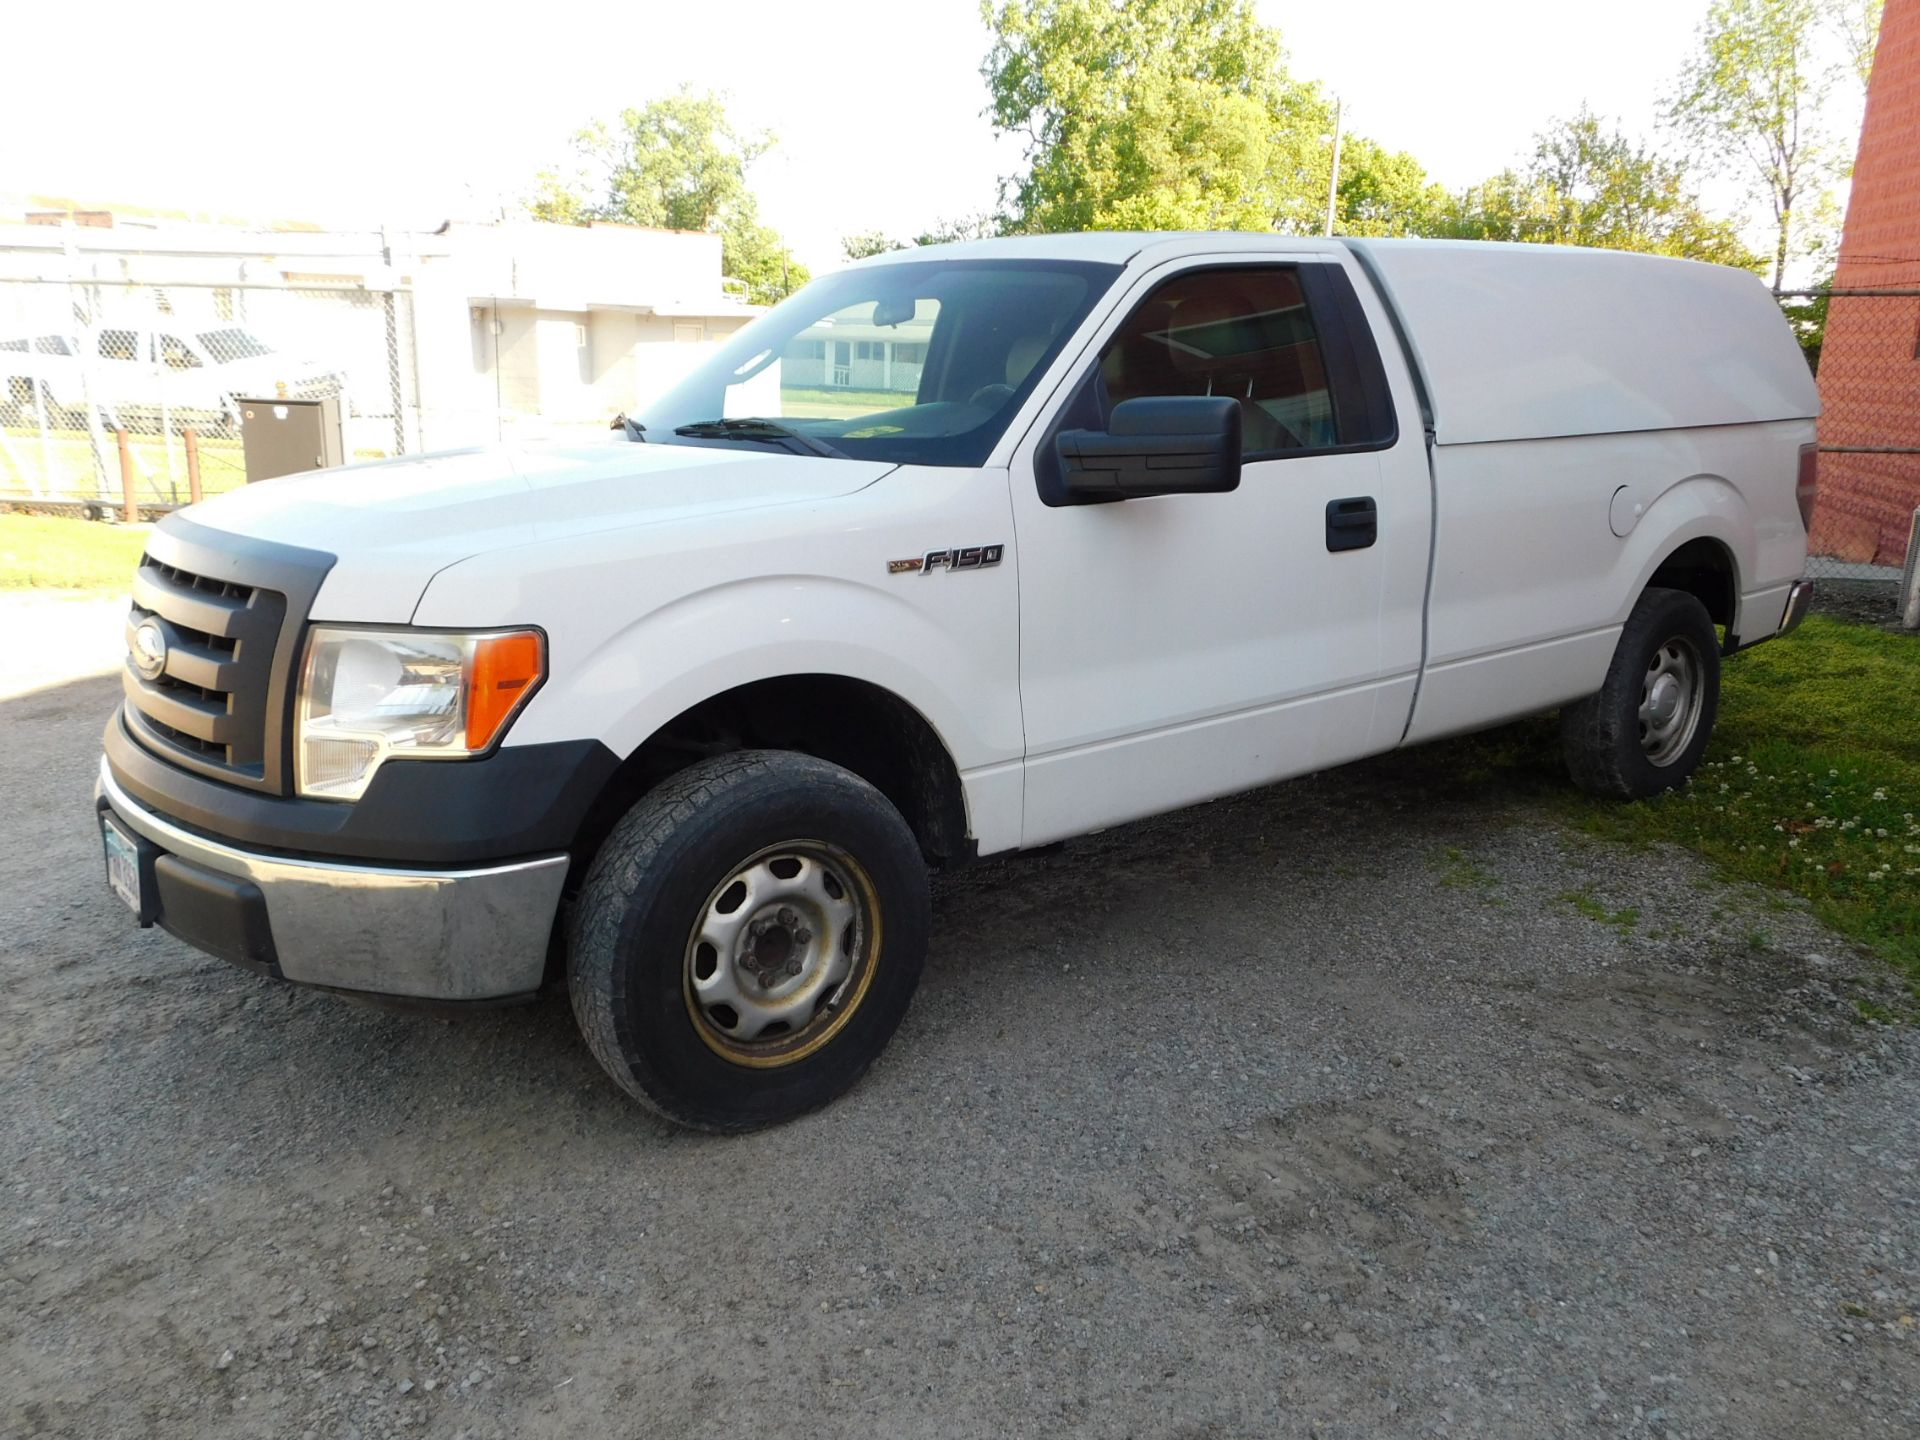 2011 Ford Pick up F-150XL vin 1FTMF1CM3CKD12942, Automatic Transmission, PW, Pl, 8'Bed w/Cap 146,289 - Image 2 of 46